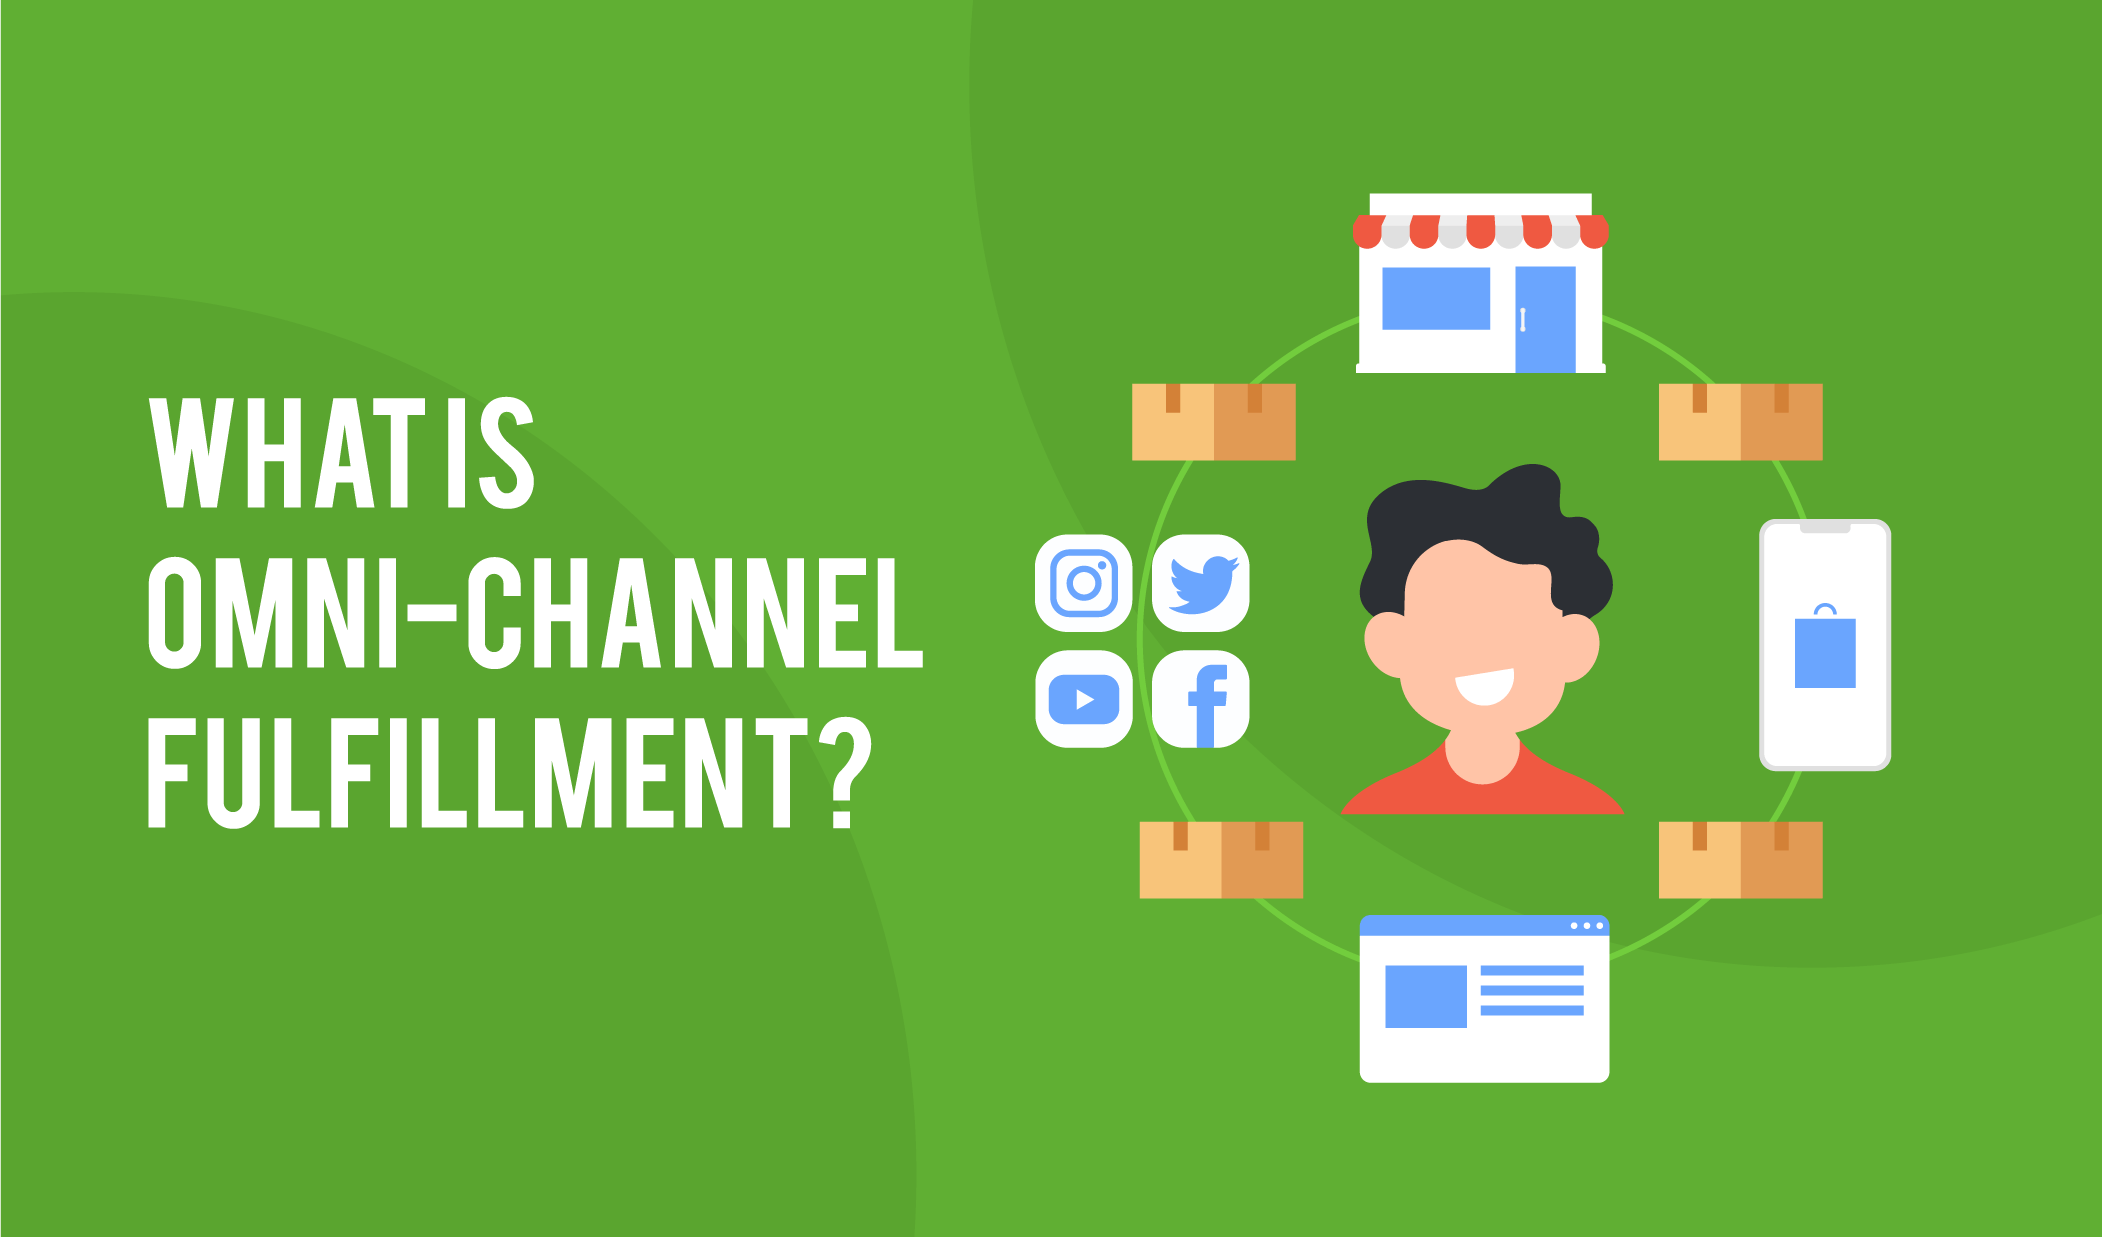 What is Omni-channel Fulfillment?